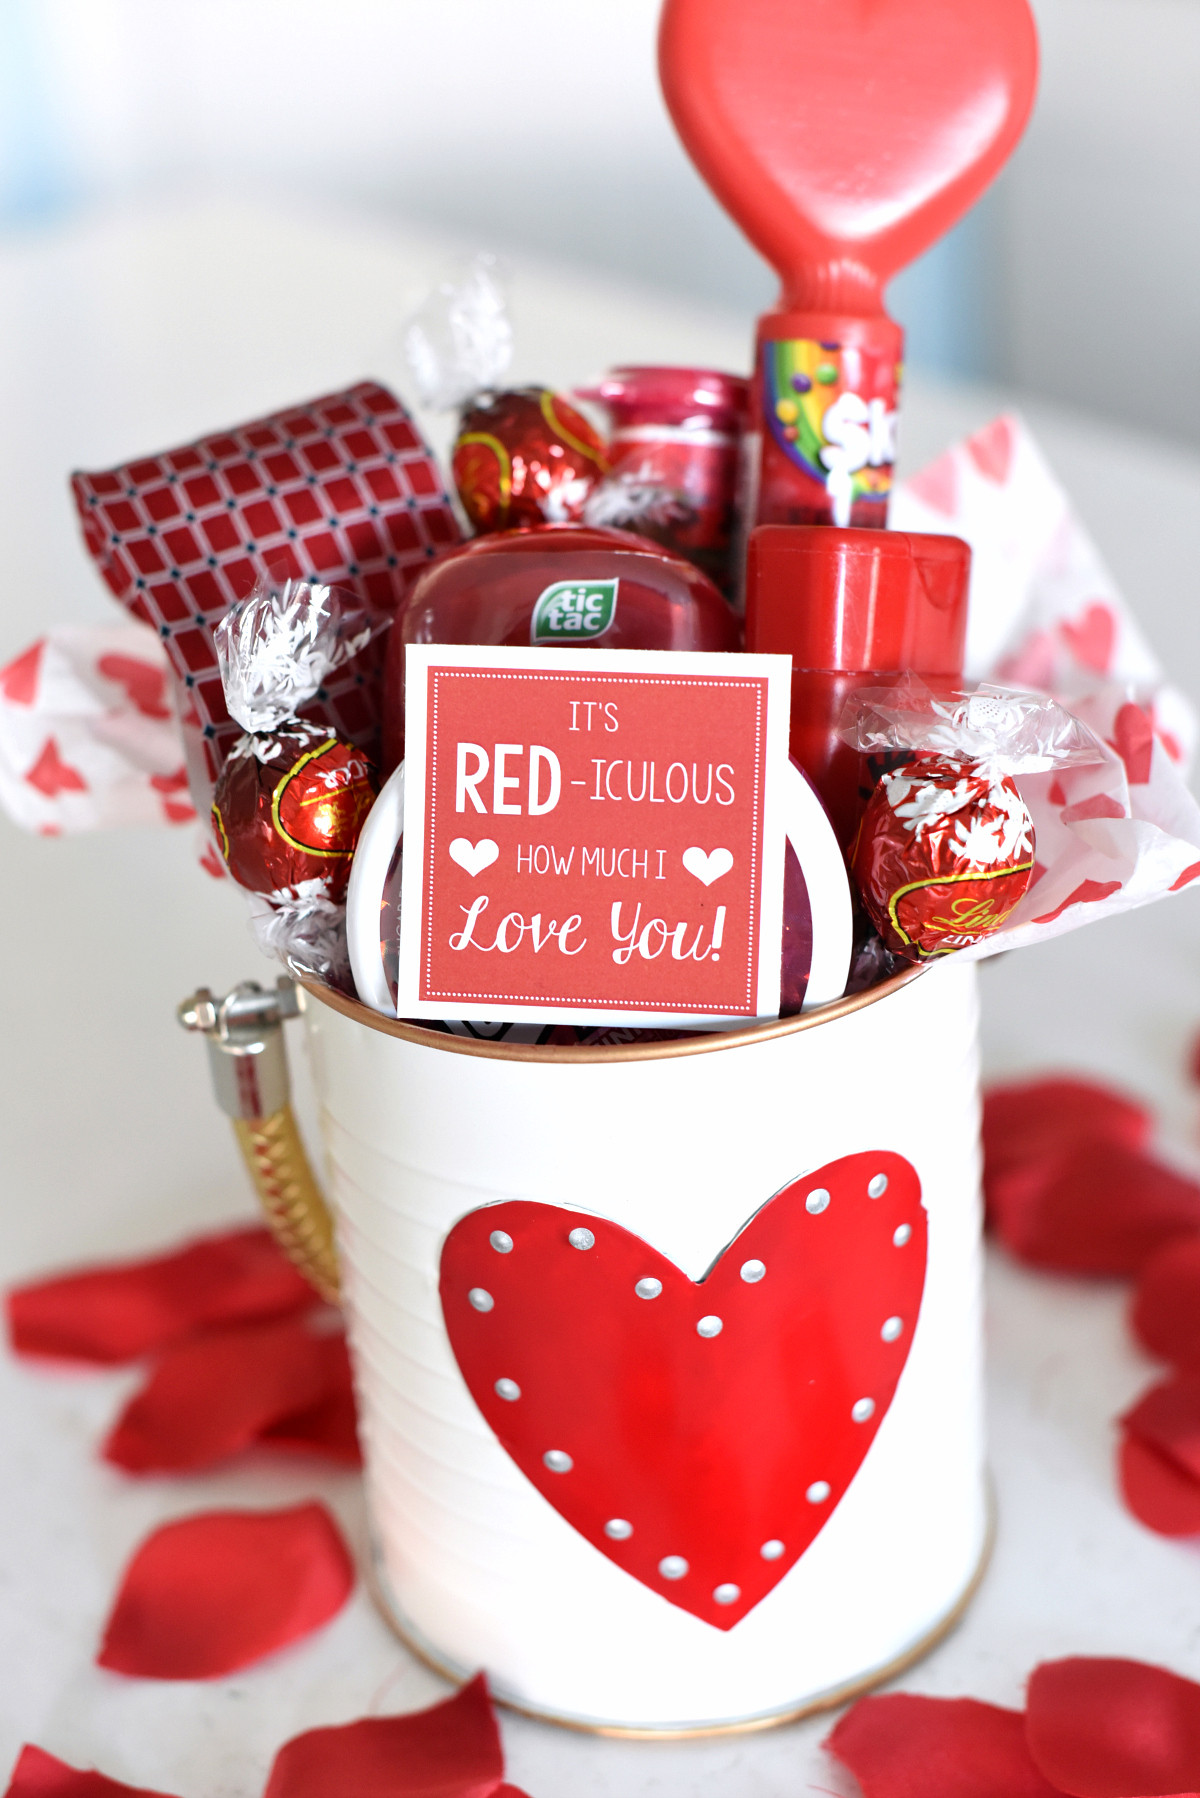 Valentine Gift Ideas For Husbands
 Cute Valentine s Day Gift Idea RED iculous Basket